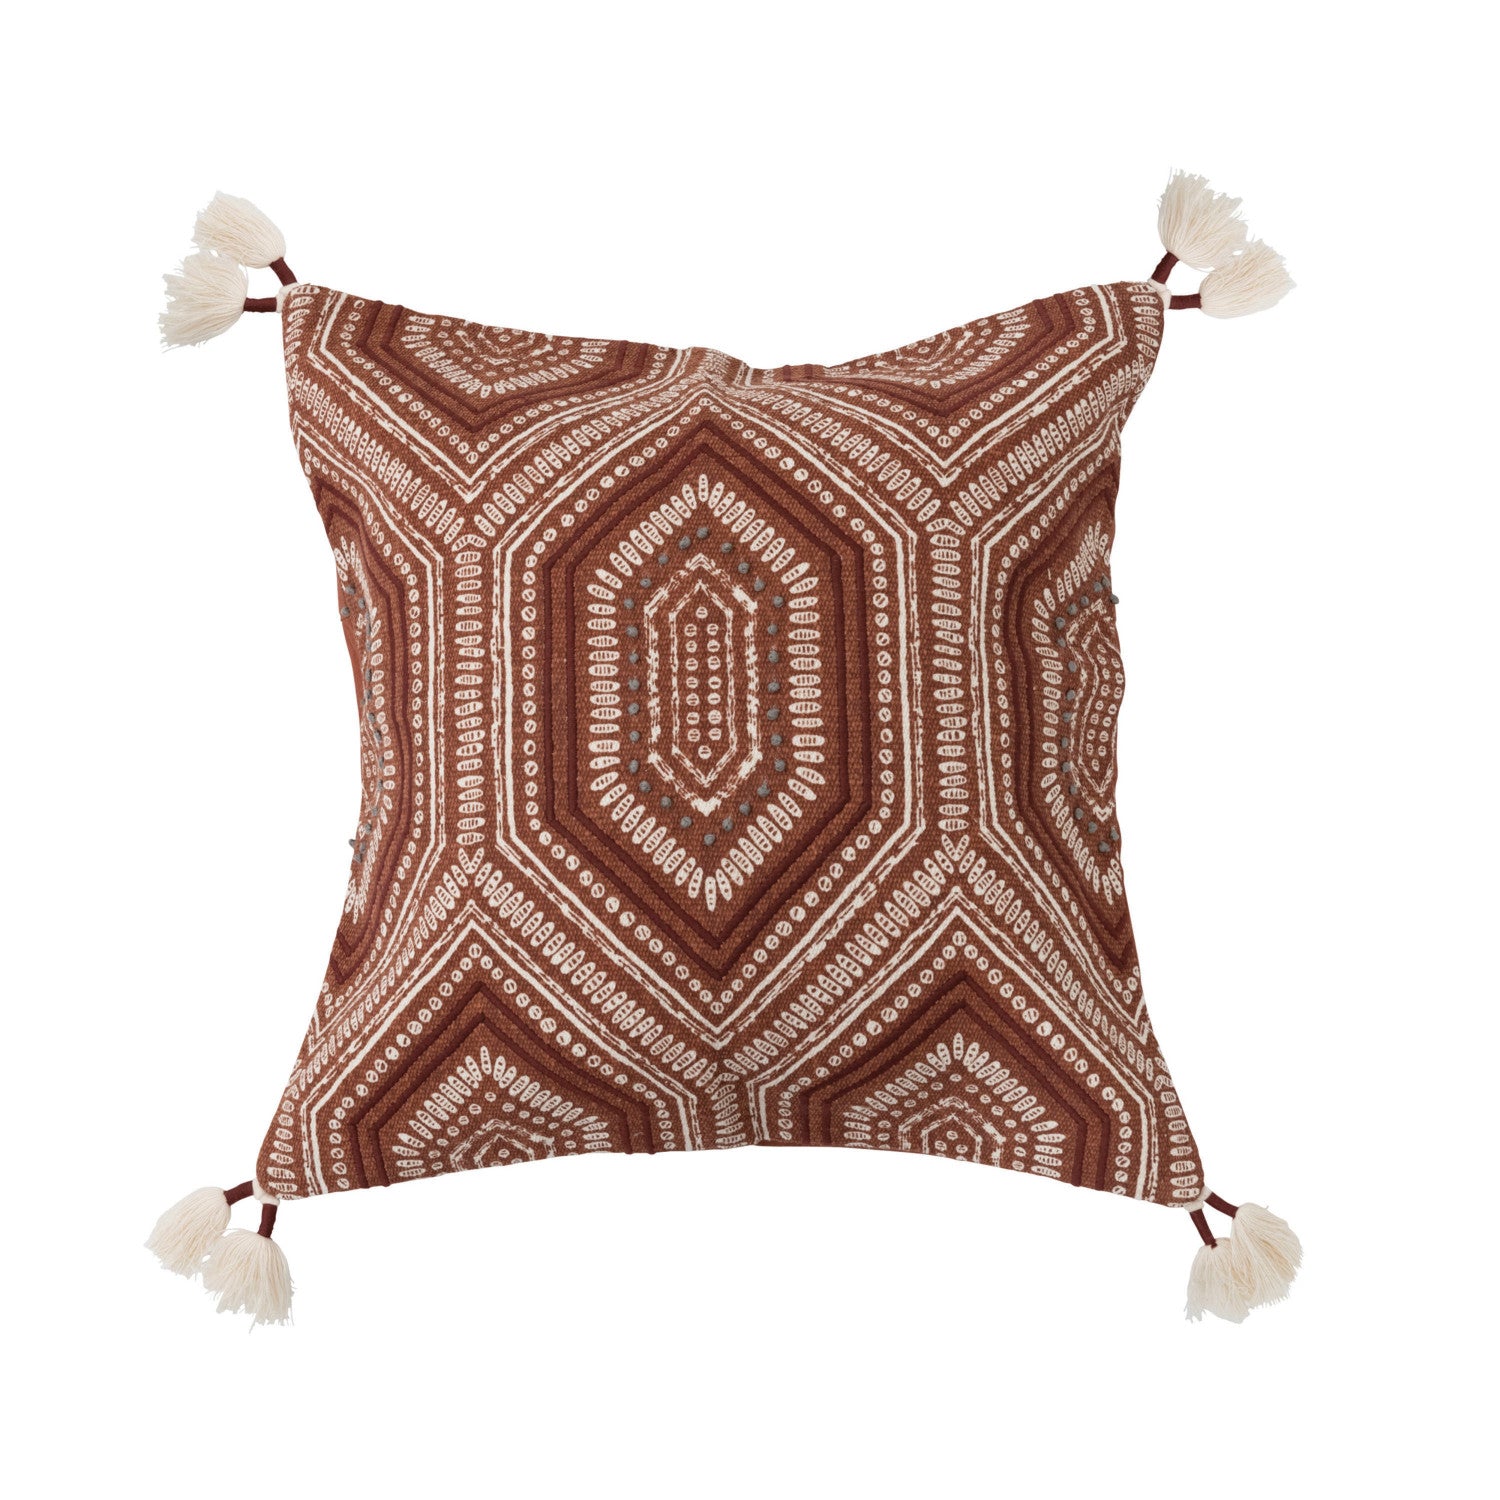 Embroidered Pillow & Tassels